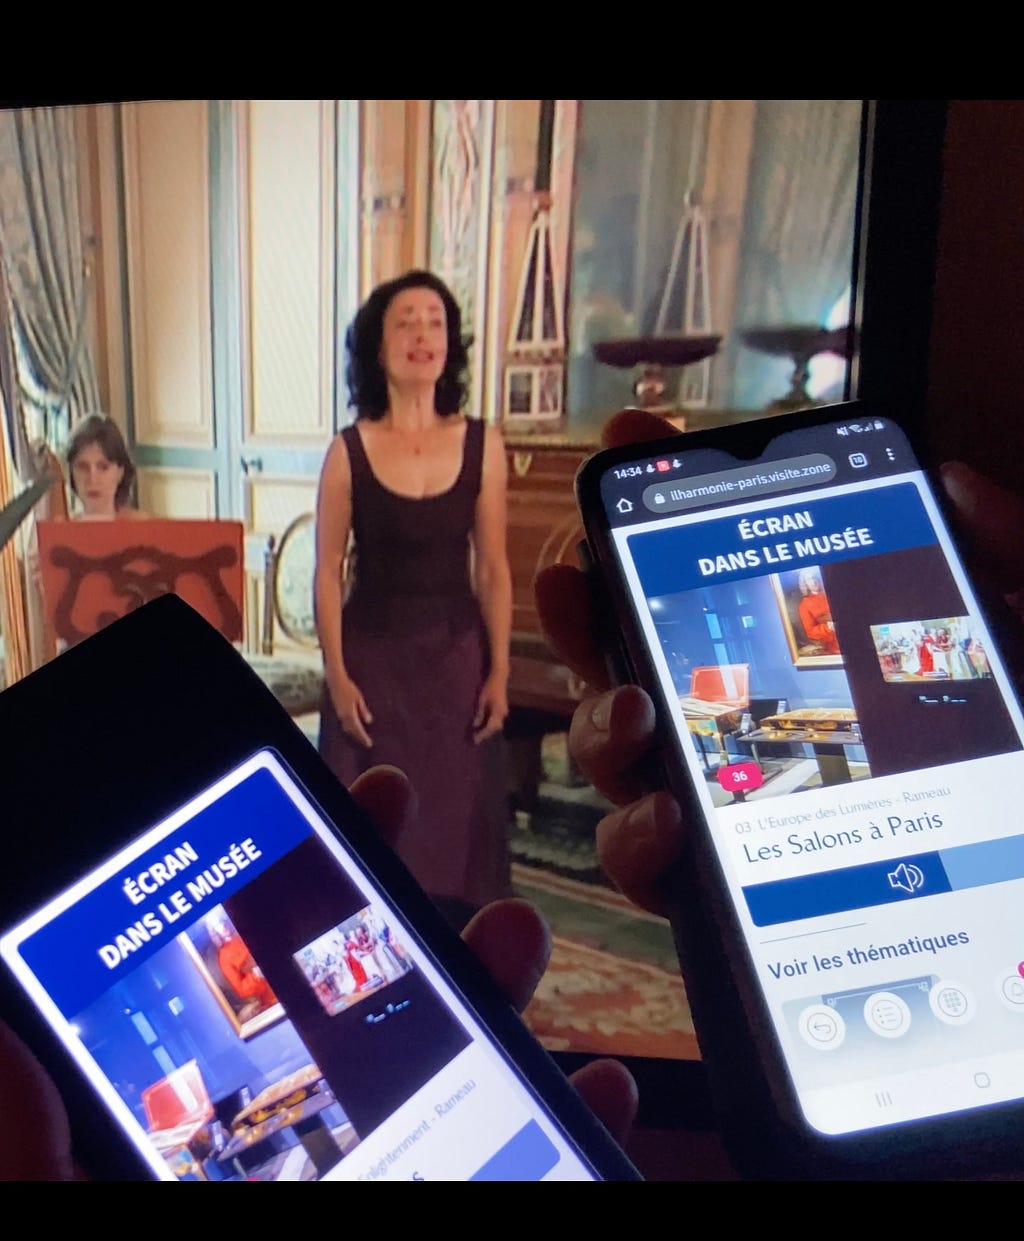 Two smartphones are being held up, displaying content from the museum’s app, and a screen in the back ground shows an opera singer performing. The phones’ screens display the app interface, highlighting ‘Les Salons à Paris’ with options to explore themes.